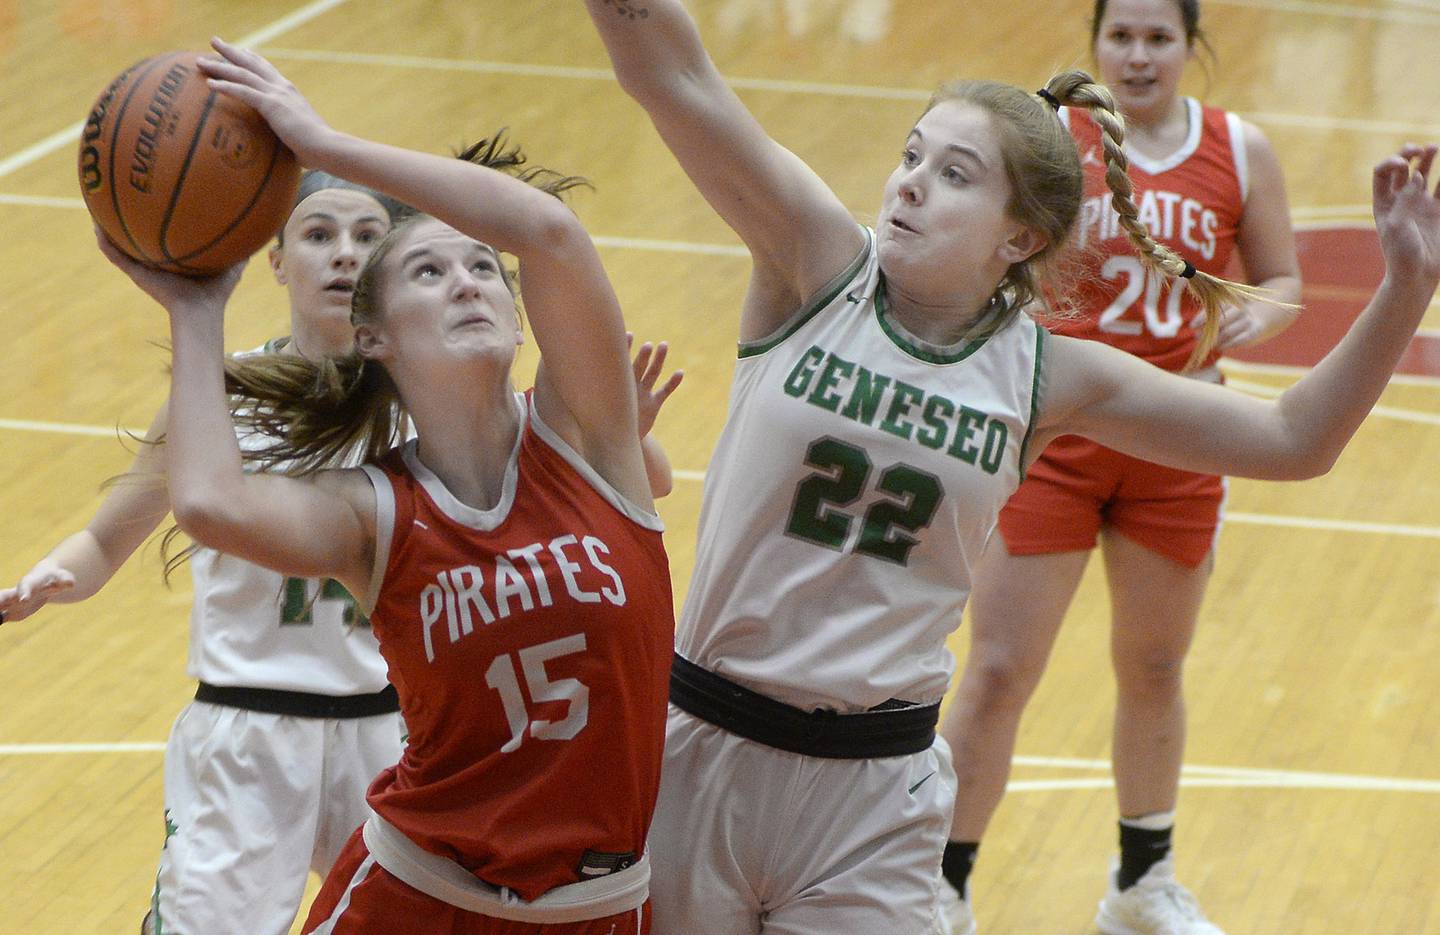 Ottawa’s Hailey Larsen shoots around the attempted block by Geneseo’s Danielle Beach in the 1st period during the Class 3A Regional title on Thursday, Feb. 16, 2023 at Ottawa High School.